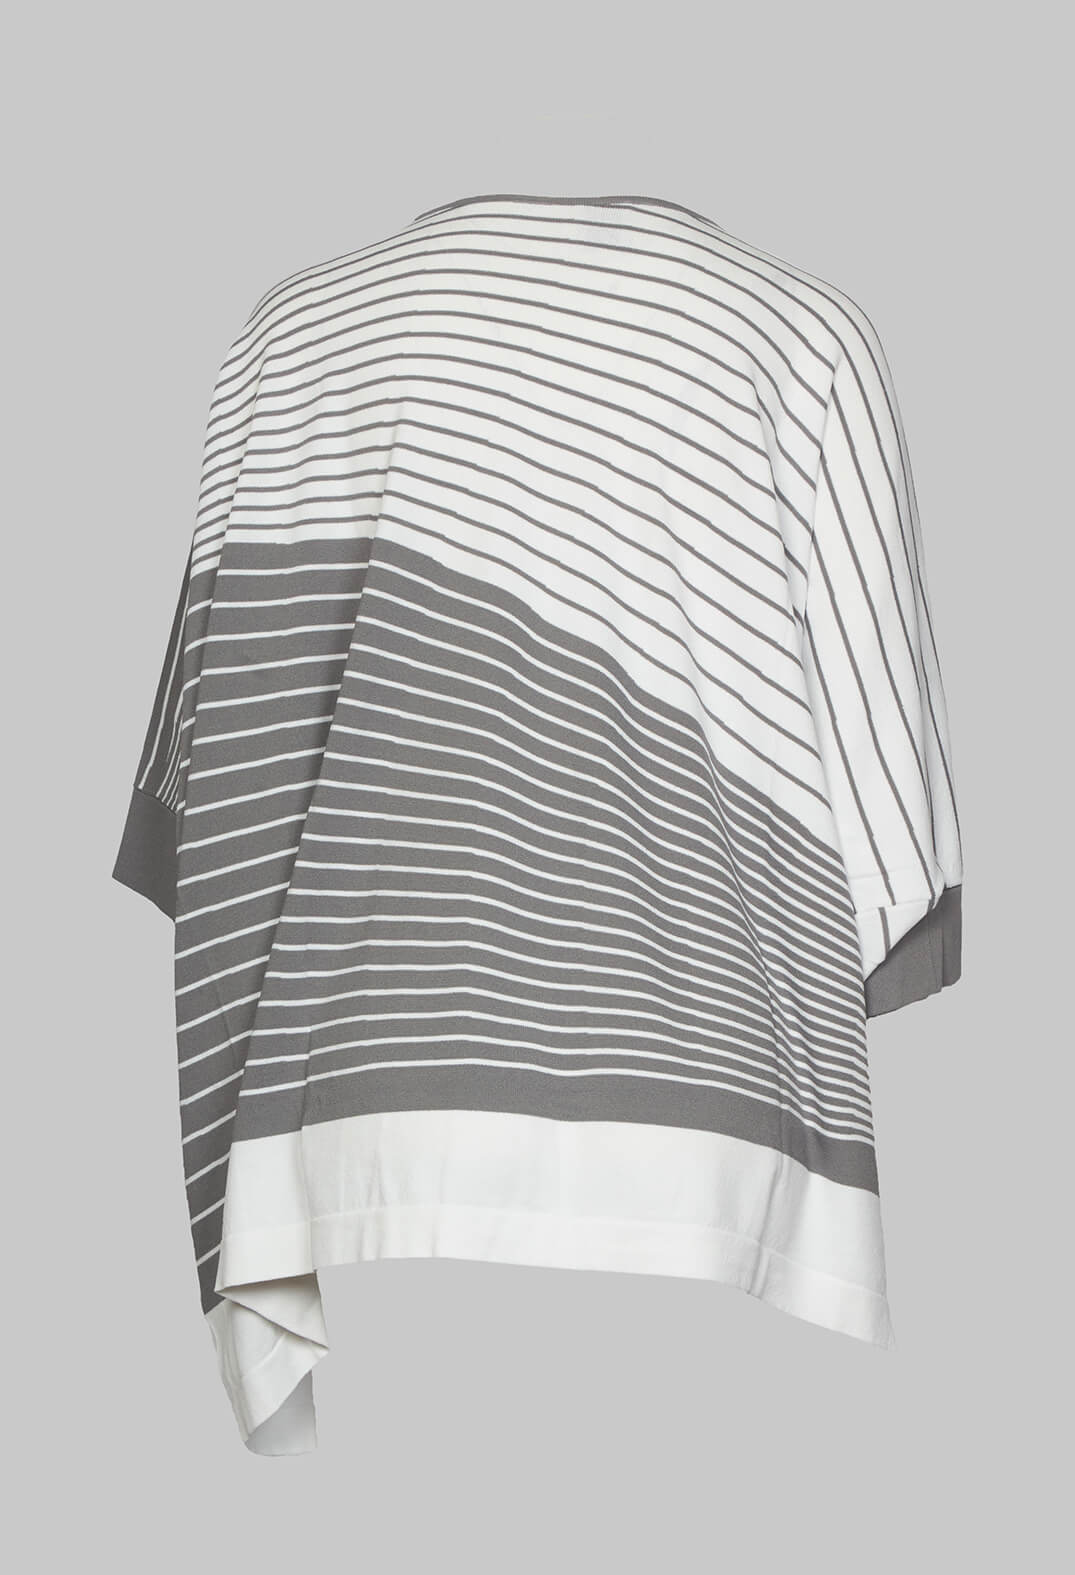 Striped Batwing Jumper in Grey and White